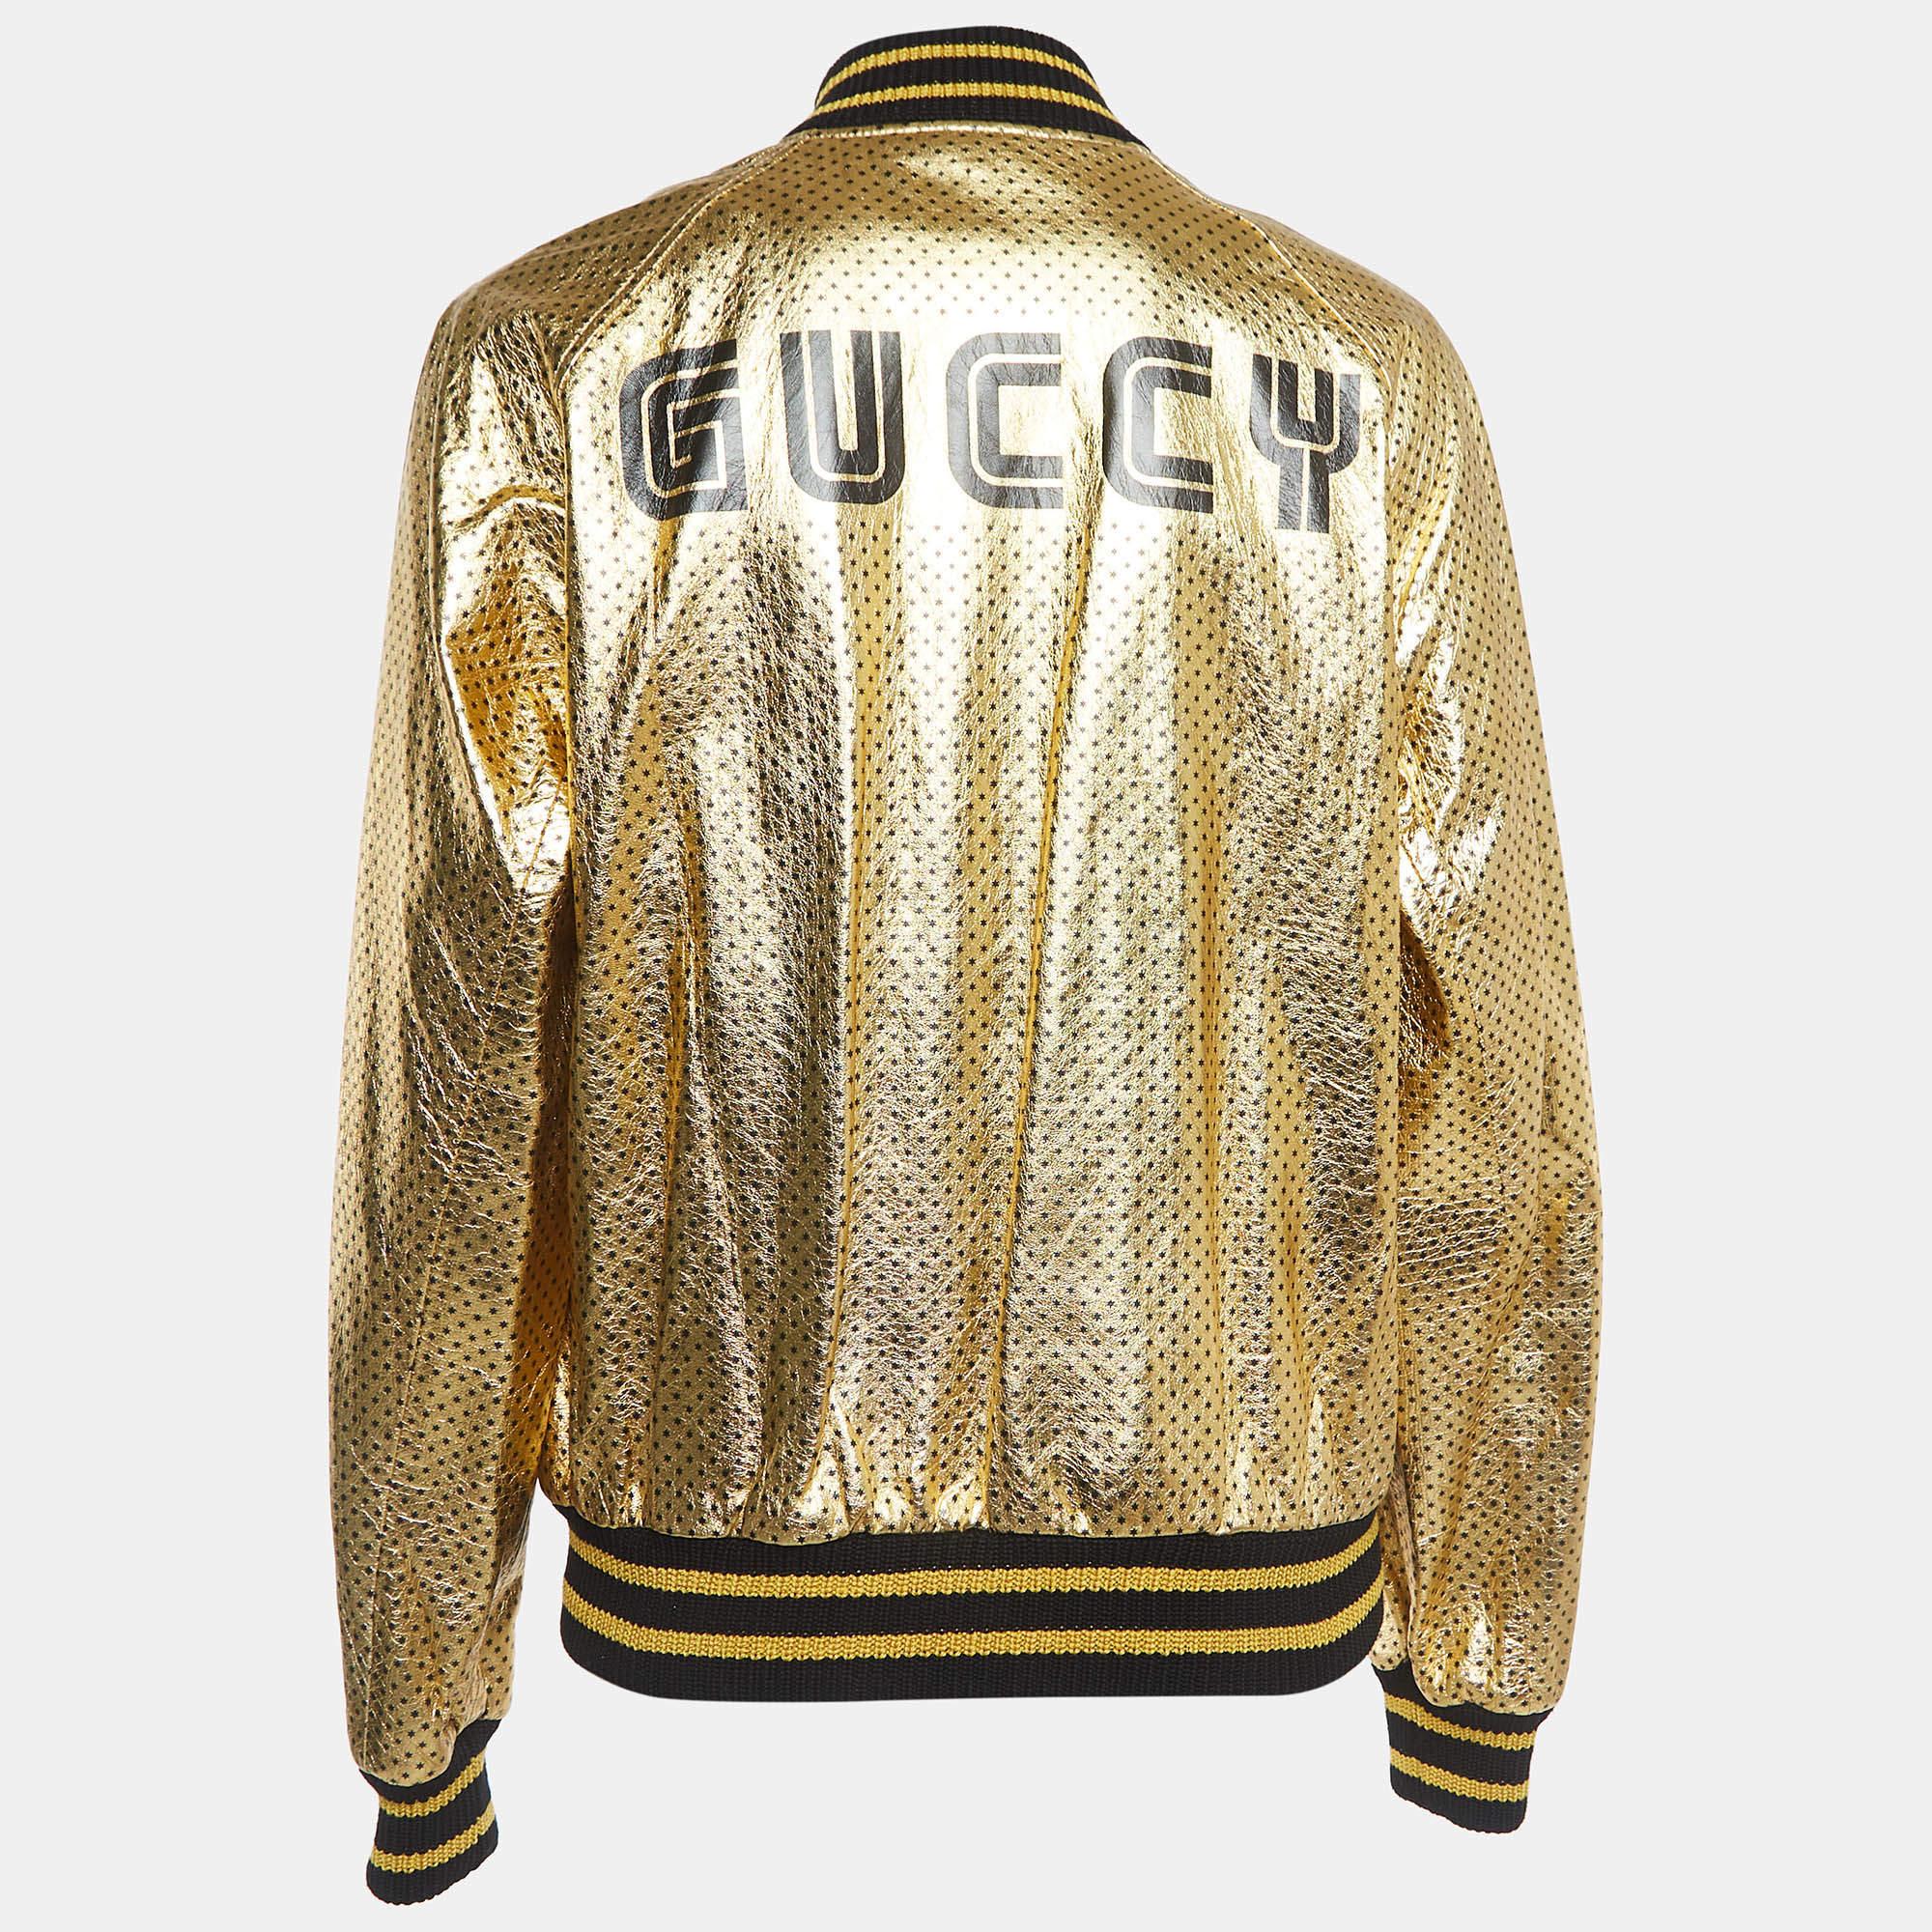 How fabulous does this Gucci gold jacket look! It is made of fine materials and features long sleeves. Pair it with tailored pants and your favorite sneakers for a luxe edit.

